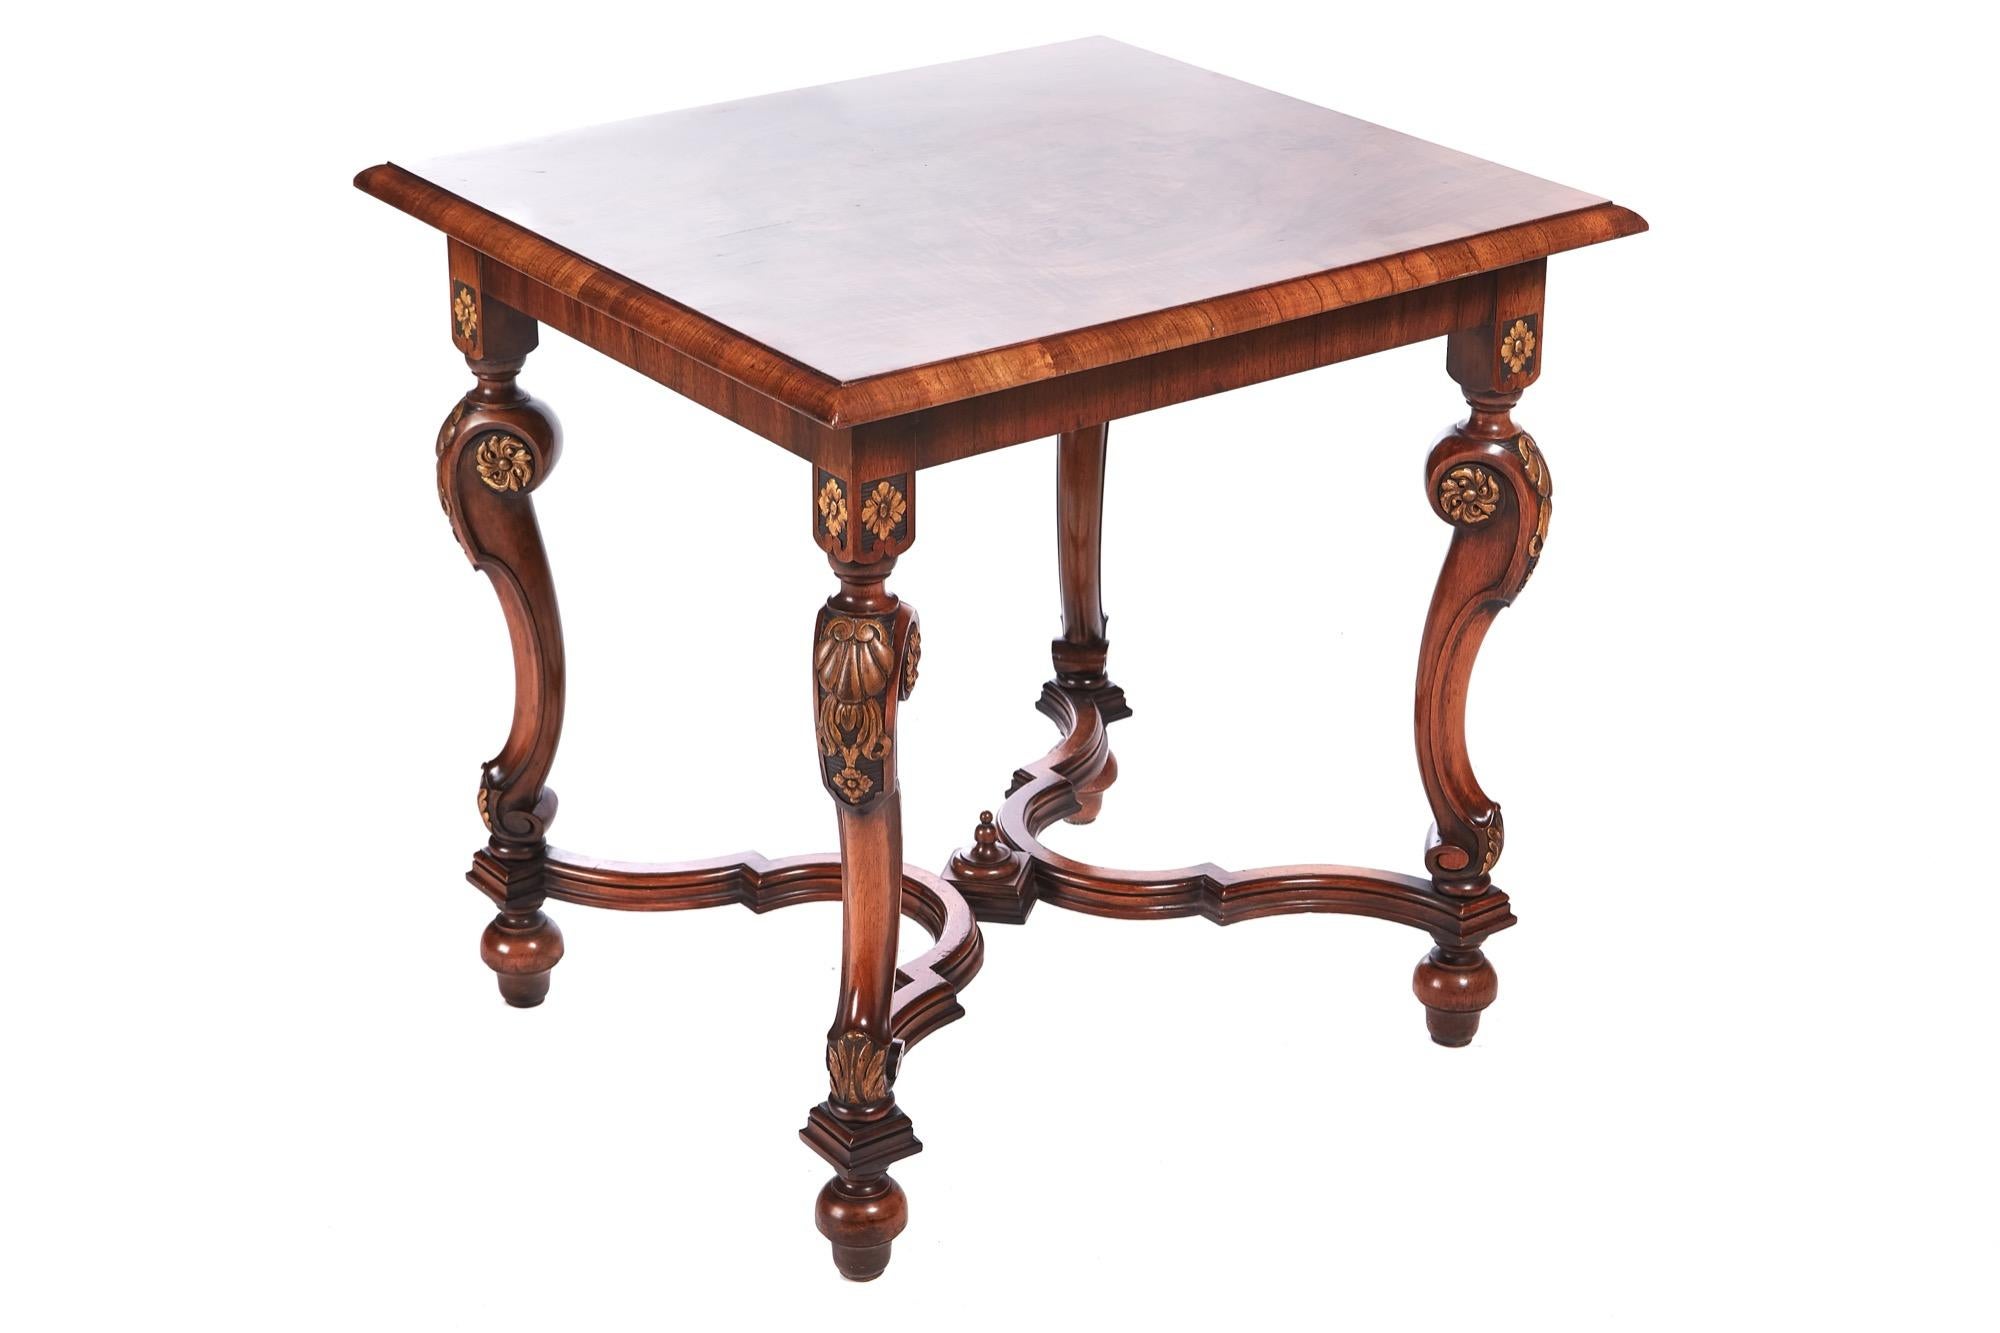 Outstanding quality burr walnut antique carved centre table having an outstanding burr walnut top, cross banded in walnut with a molded edge, supported by 4 shaped solid walnut cabriole legs with gilt carved decoration untied by a shaped solid